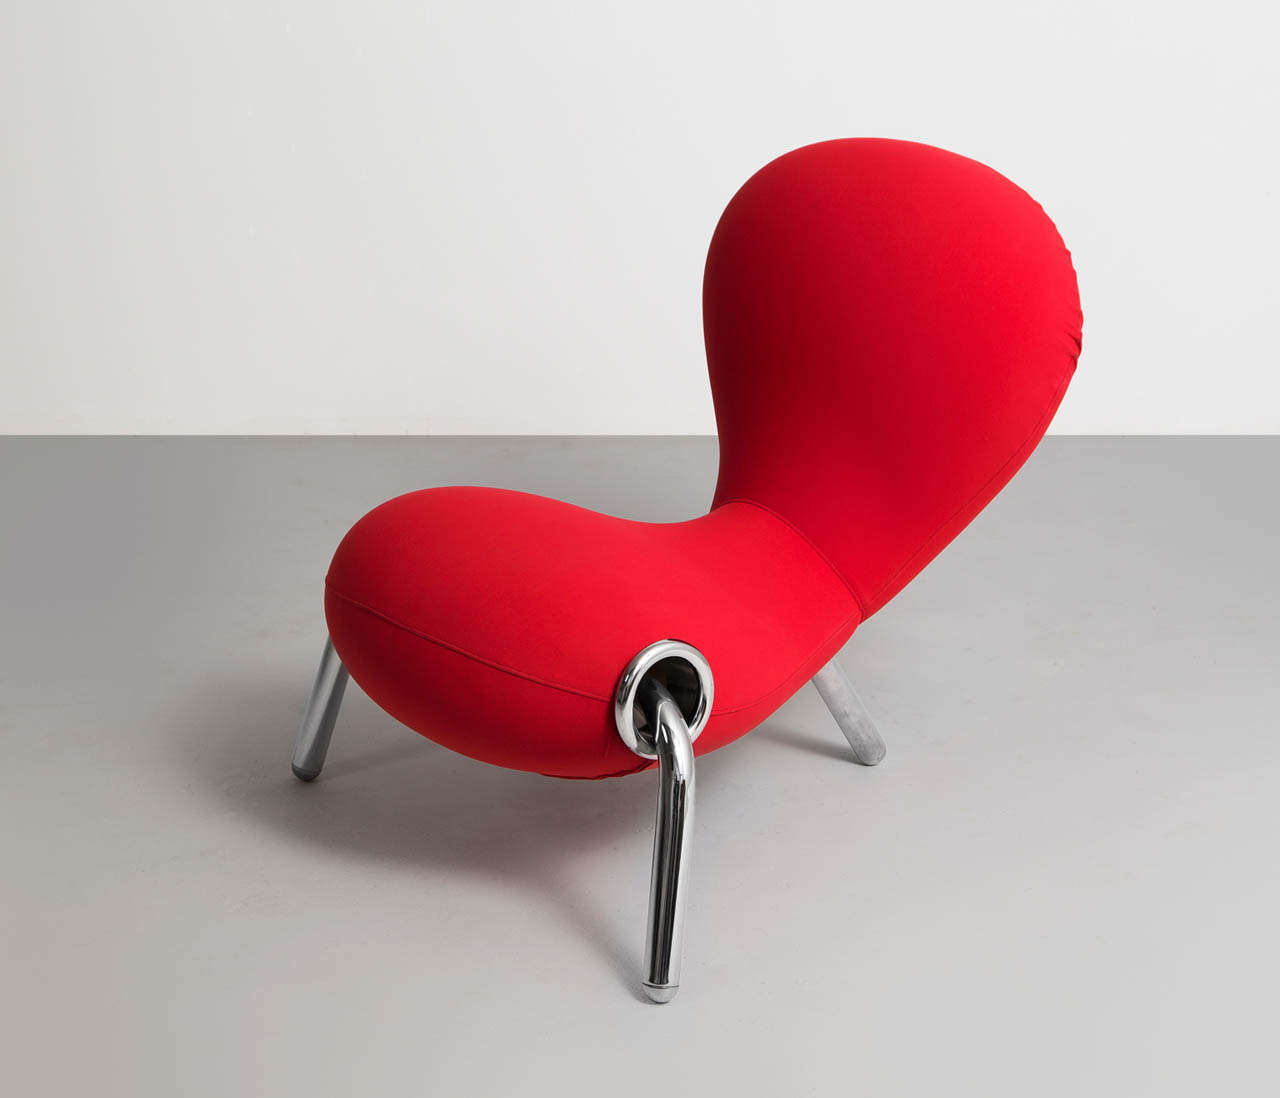 Lounge chair, in metal and fabric, by Marc Newson, Australia, 1988. 

The embryo chair was designed by Marc Newson in 1988. This chair was commissioned by the Museum of Applied Arts and Sciences (Powerhouse Museum). Marc Newson was only 25 when he